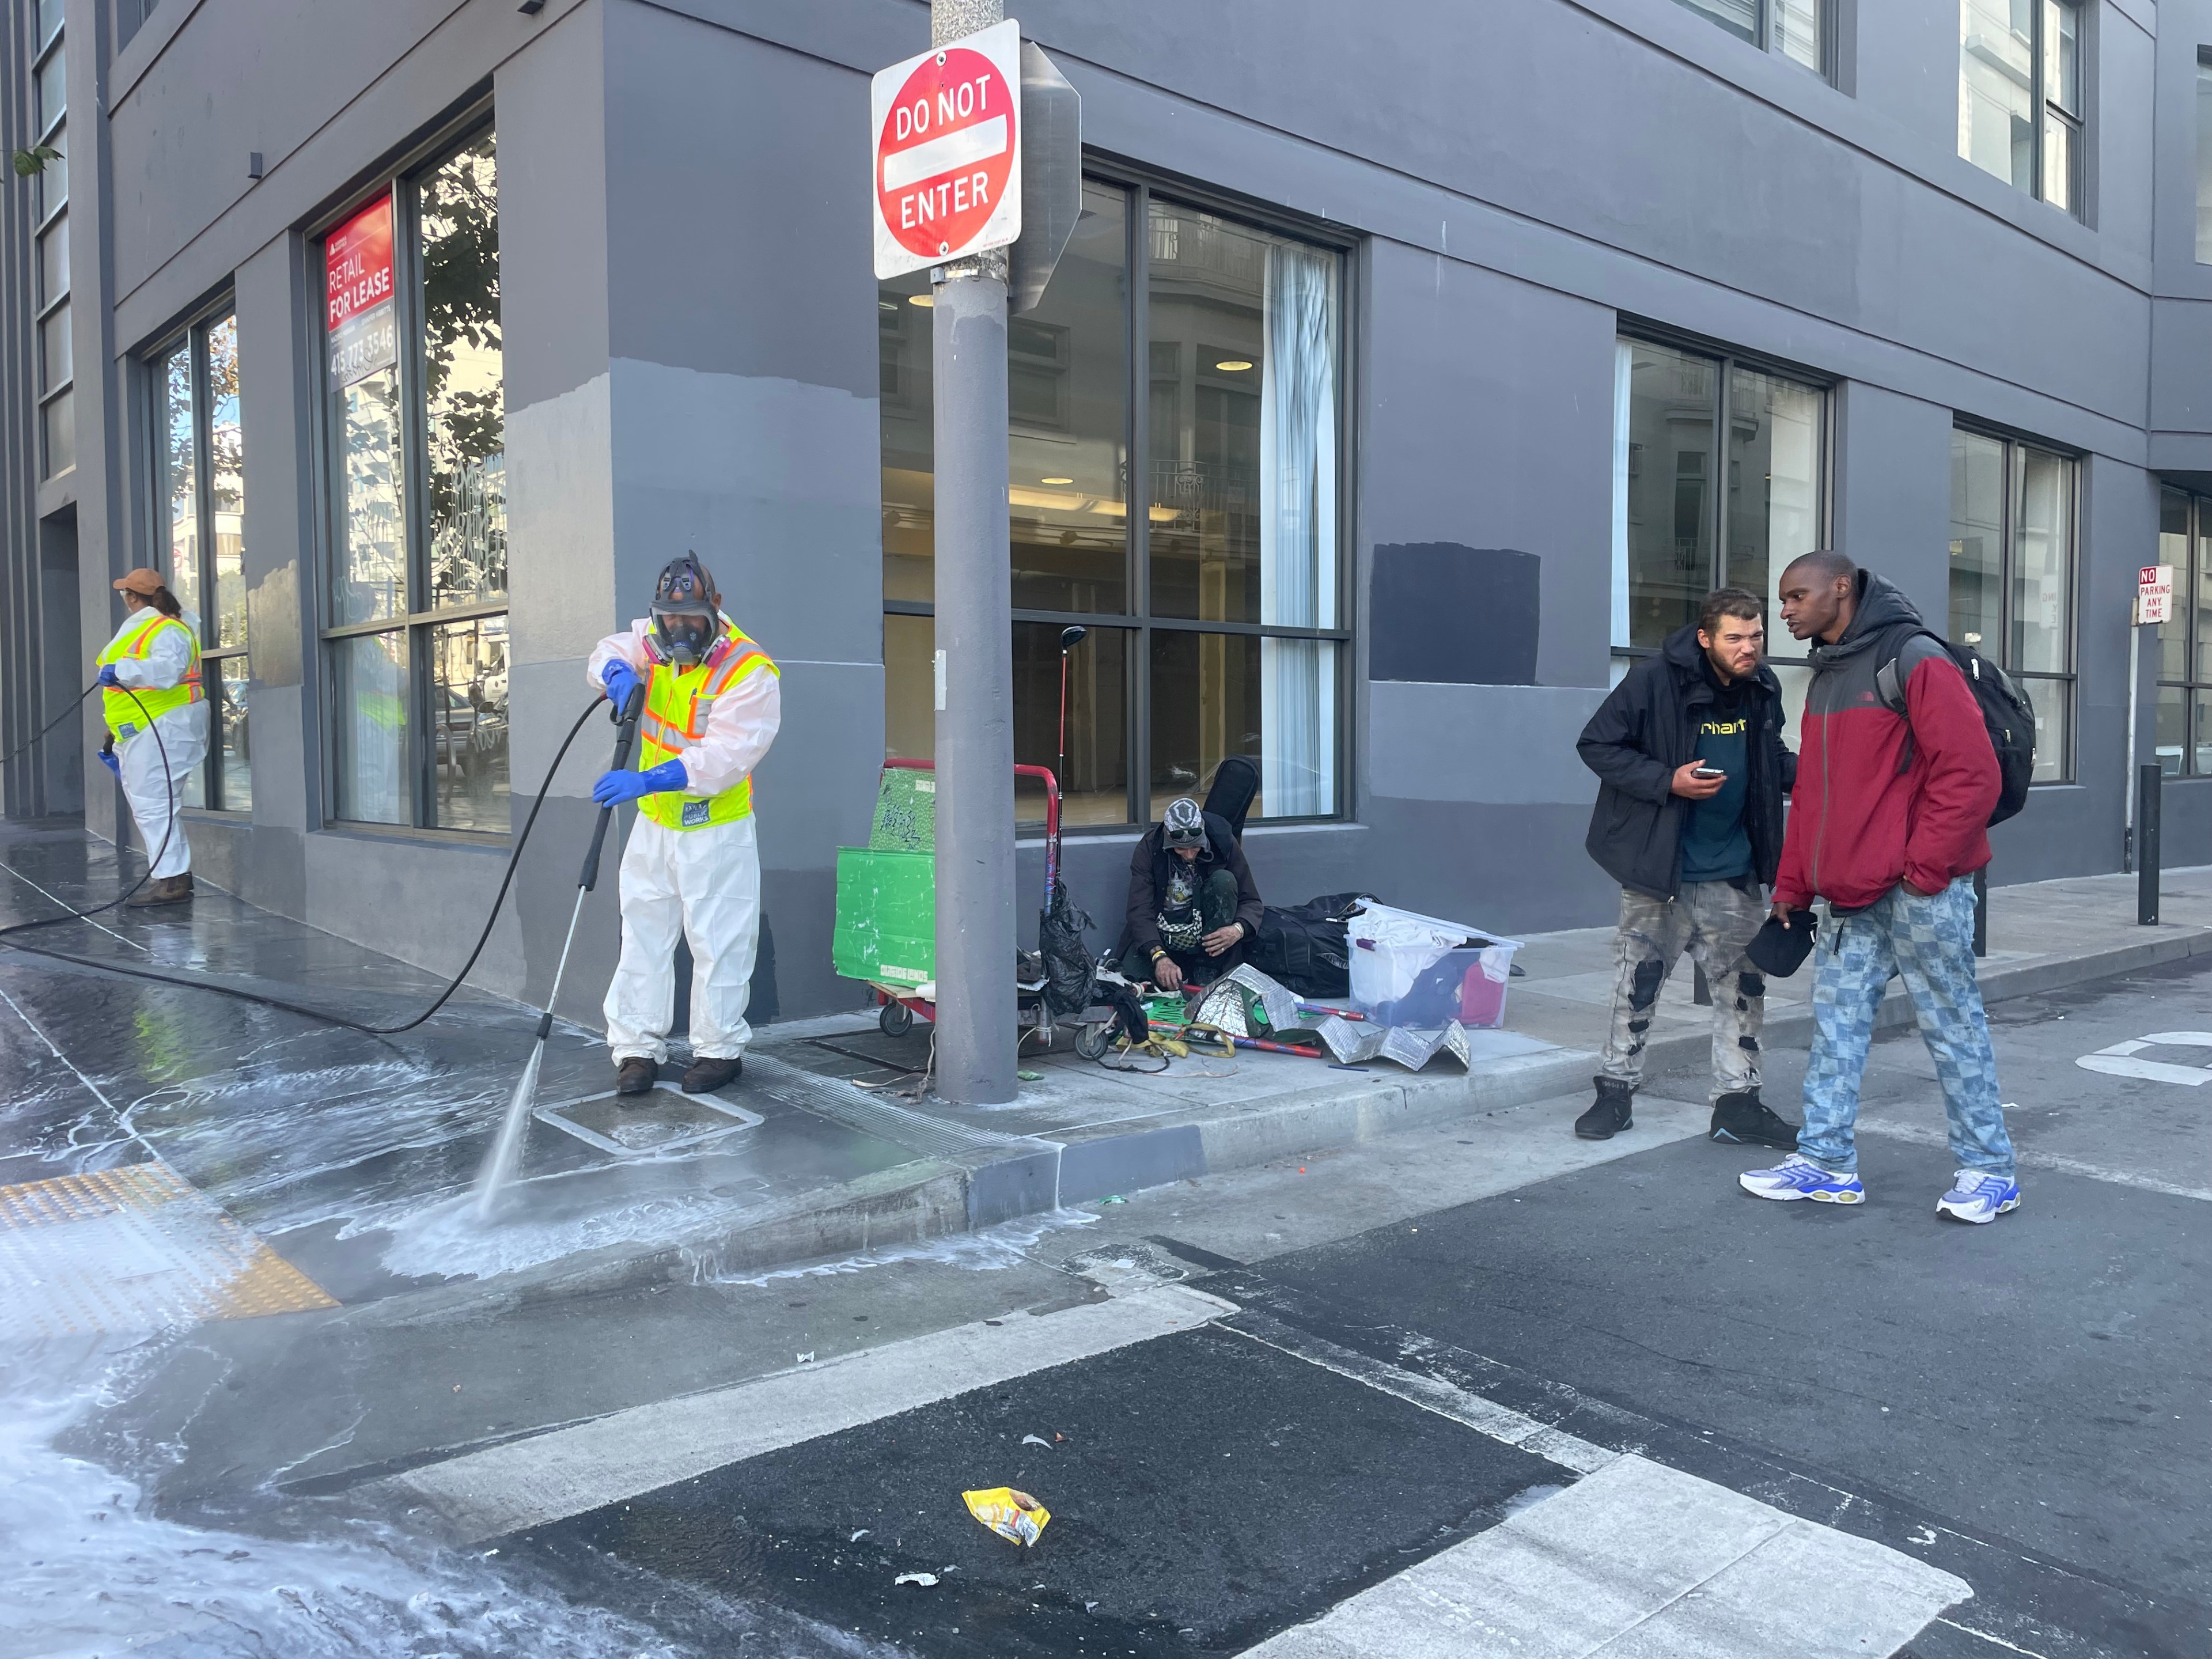 A city worker washes the sidewalk while unhoused people stand to the side.